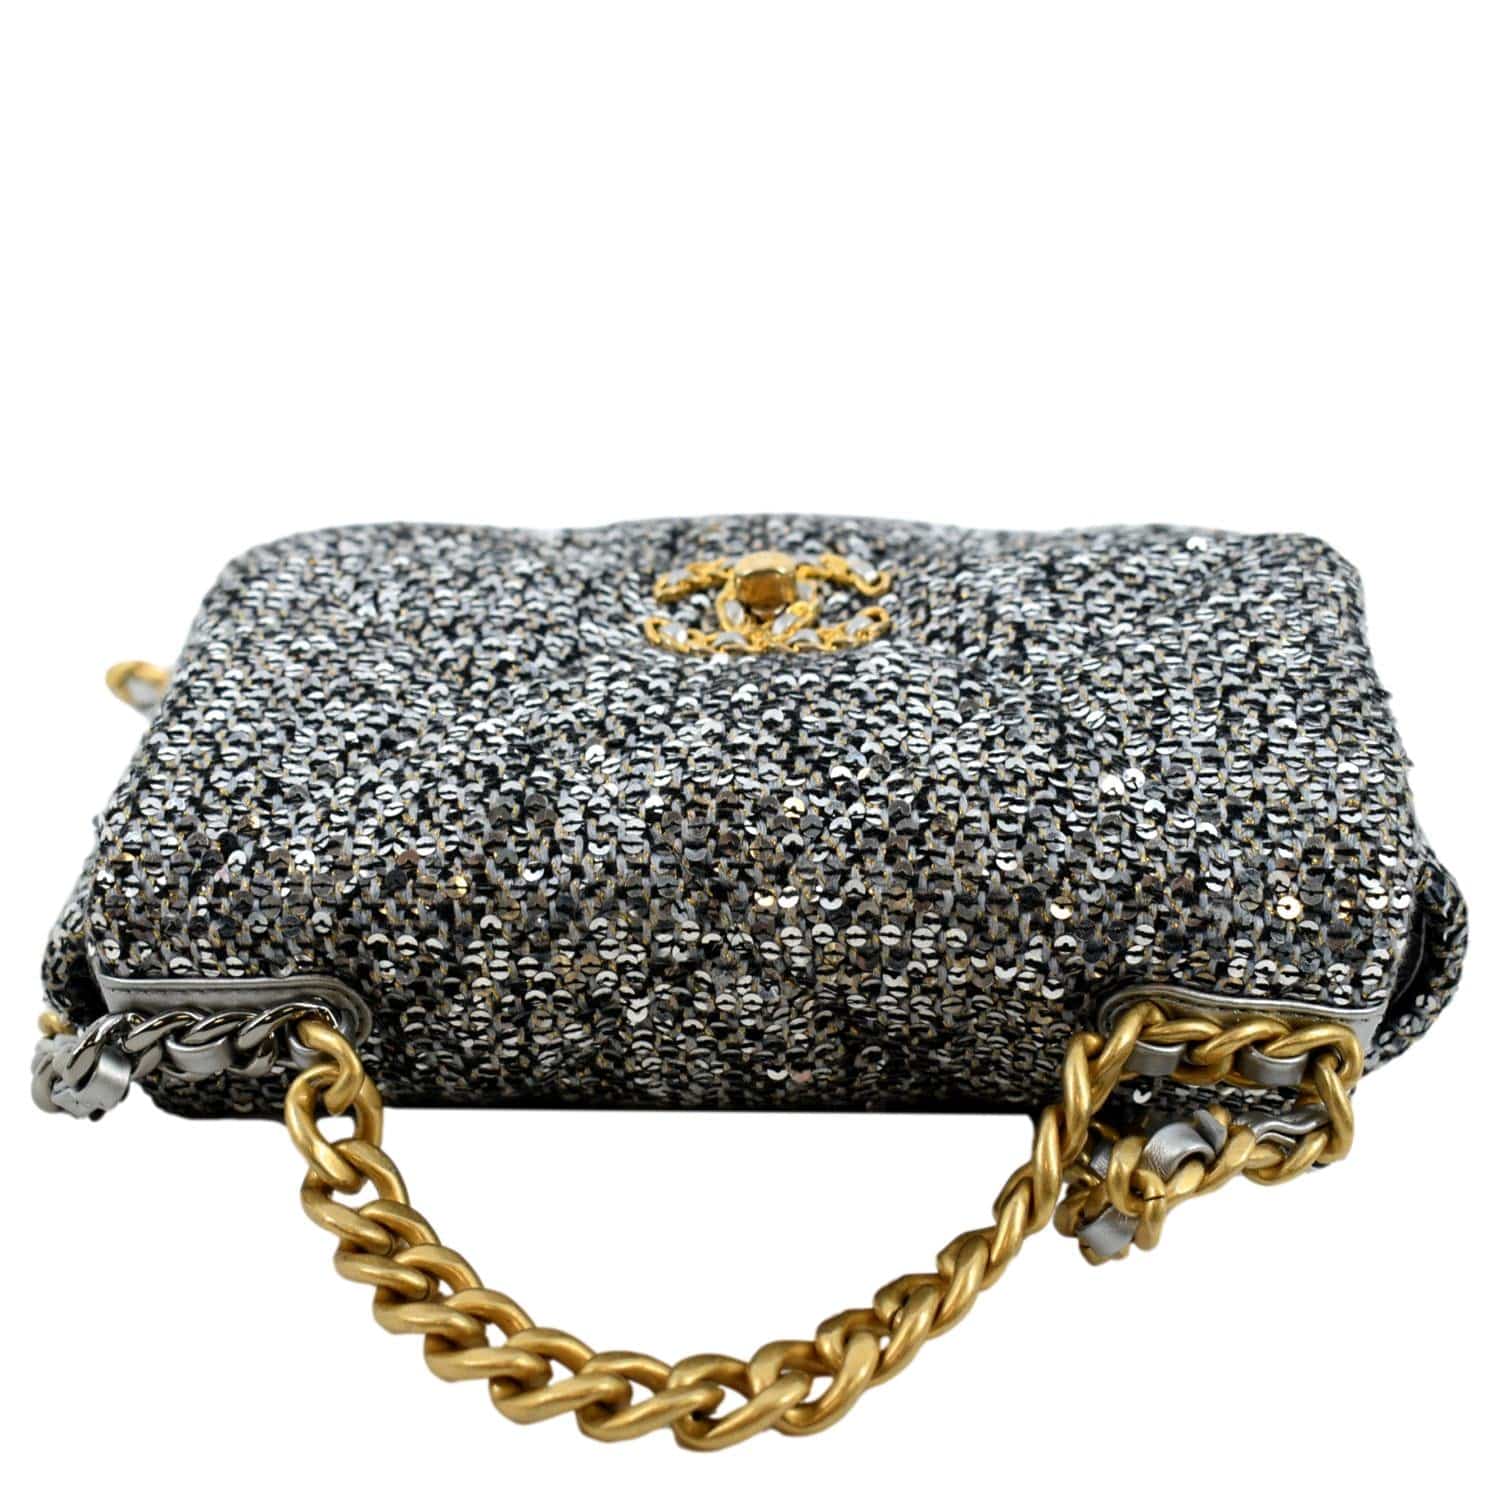 CHANEL Pre-Owned 2020 Chanel 19 Wallet On Chain Shoulder Bag